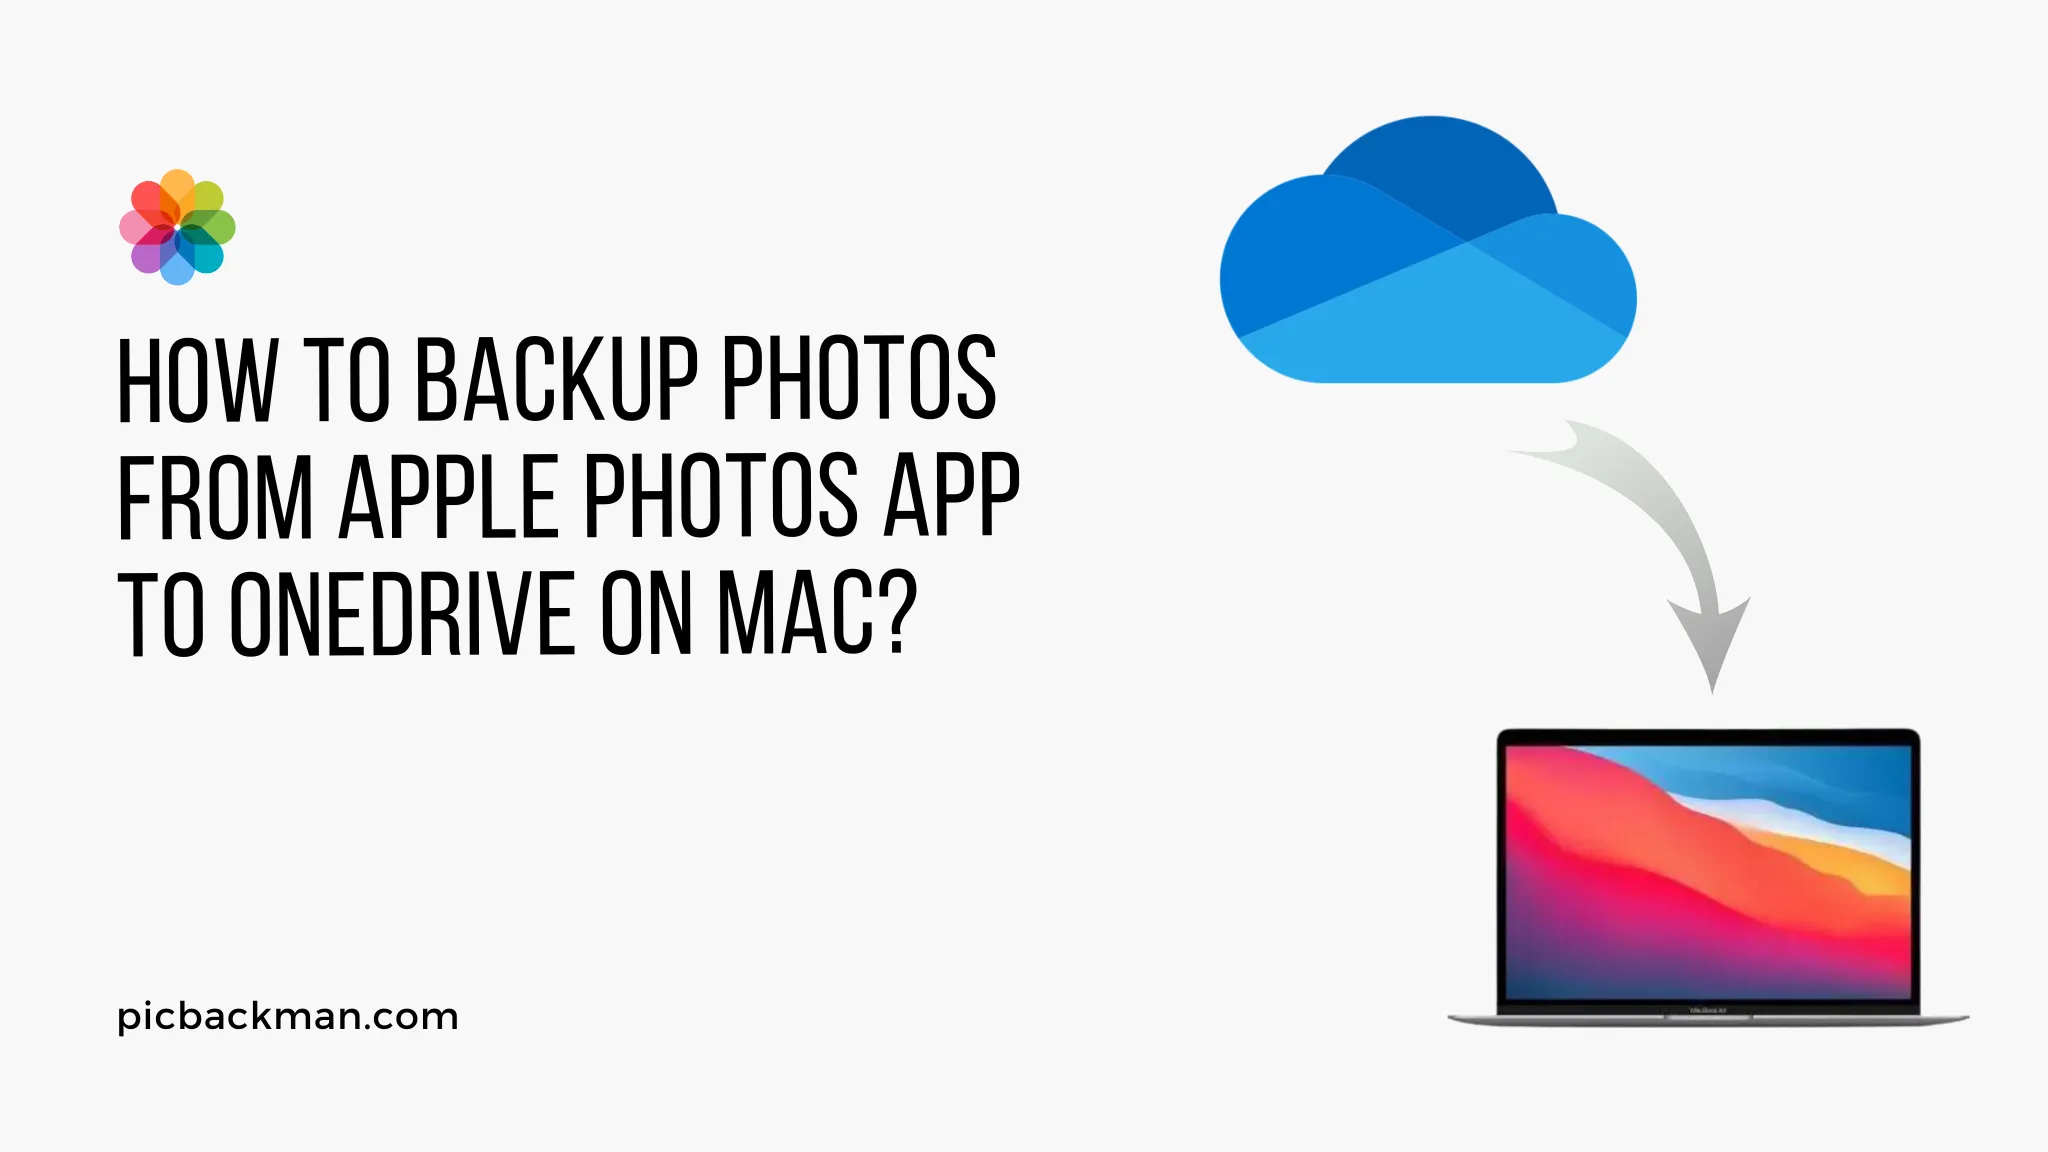 How to Backup Photos from Apple Photos App to OneDrive on Mac?